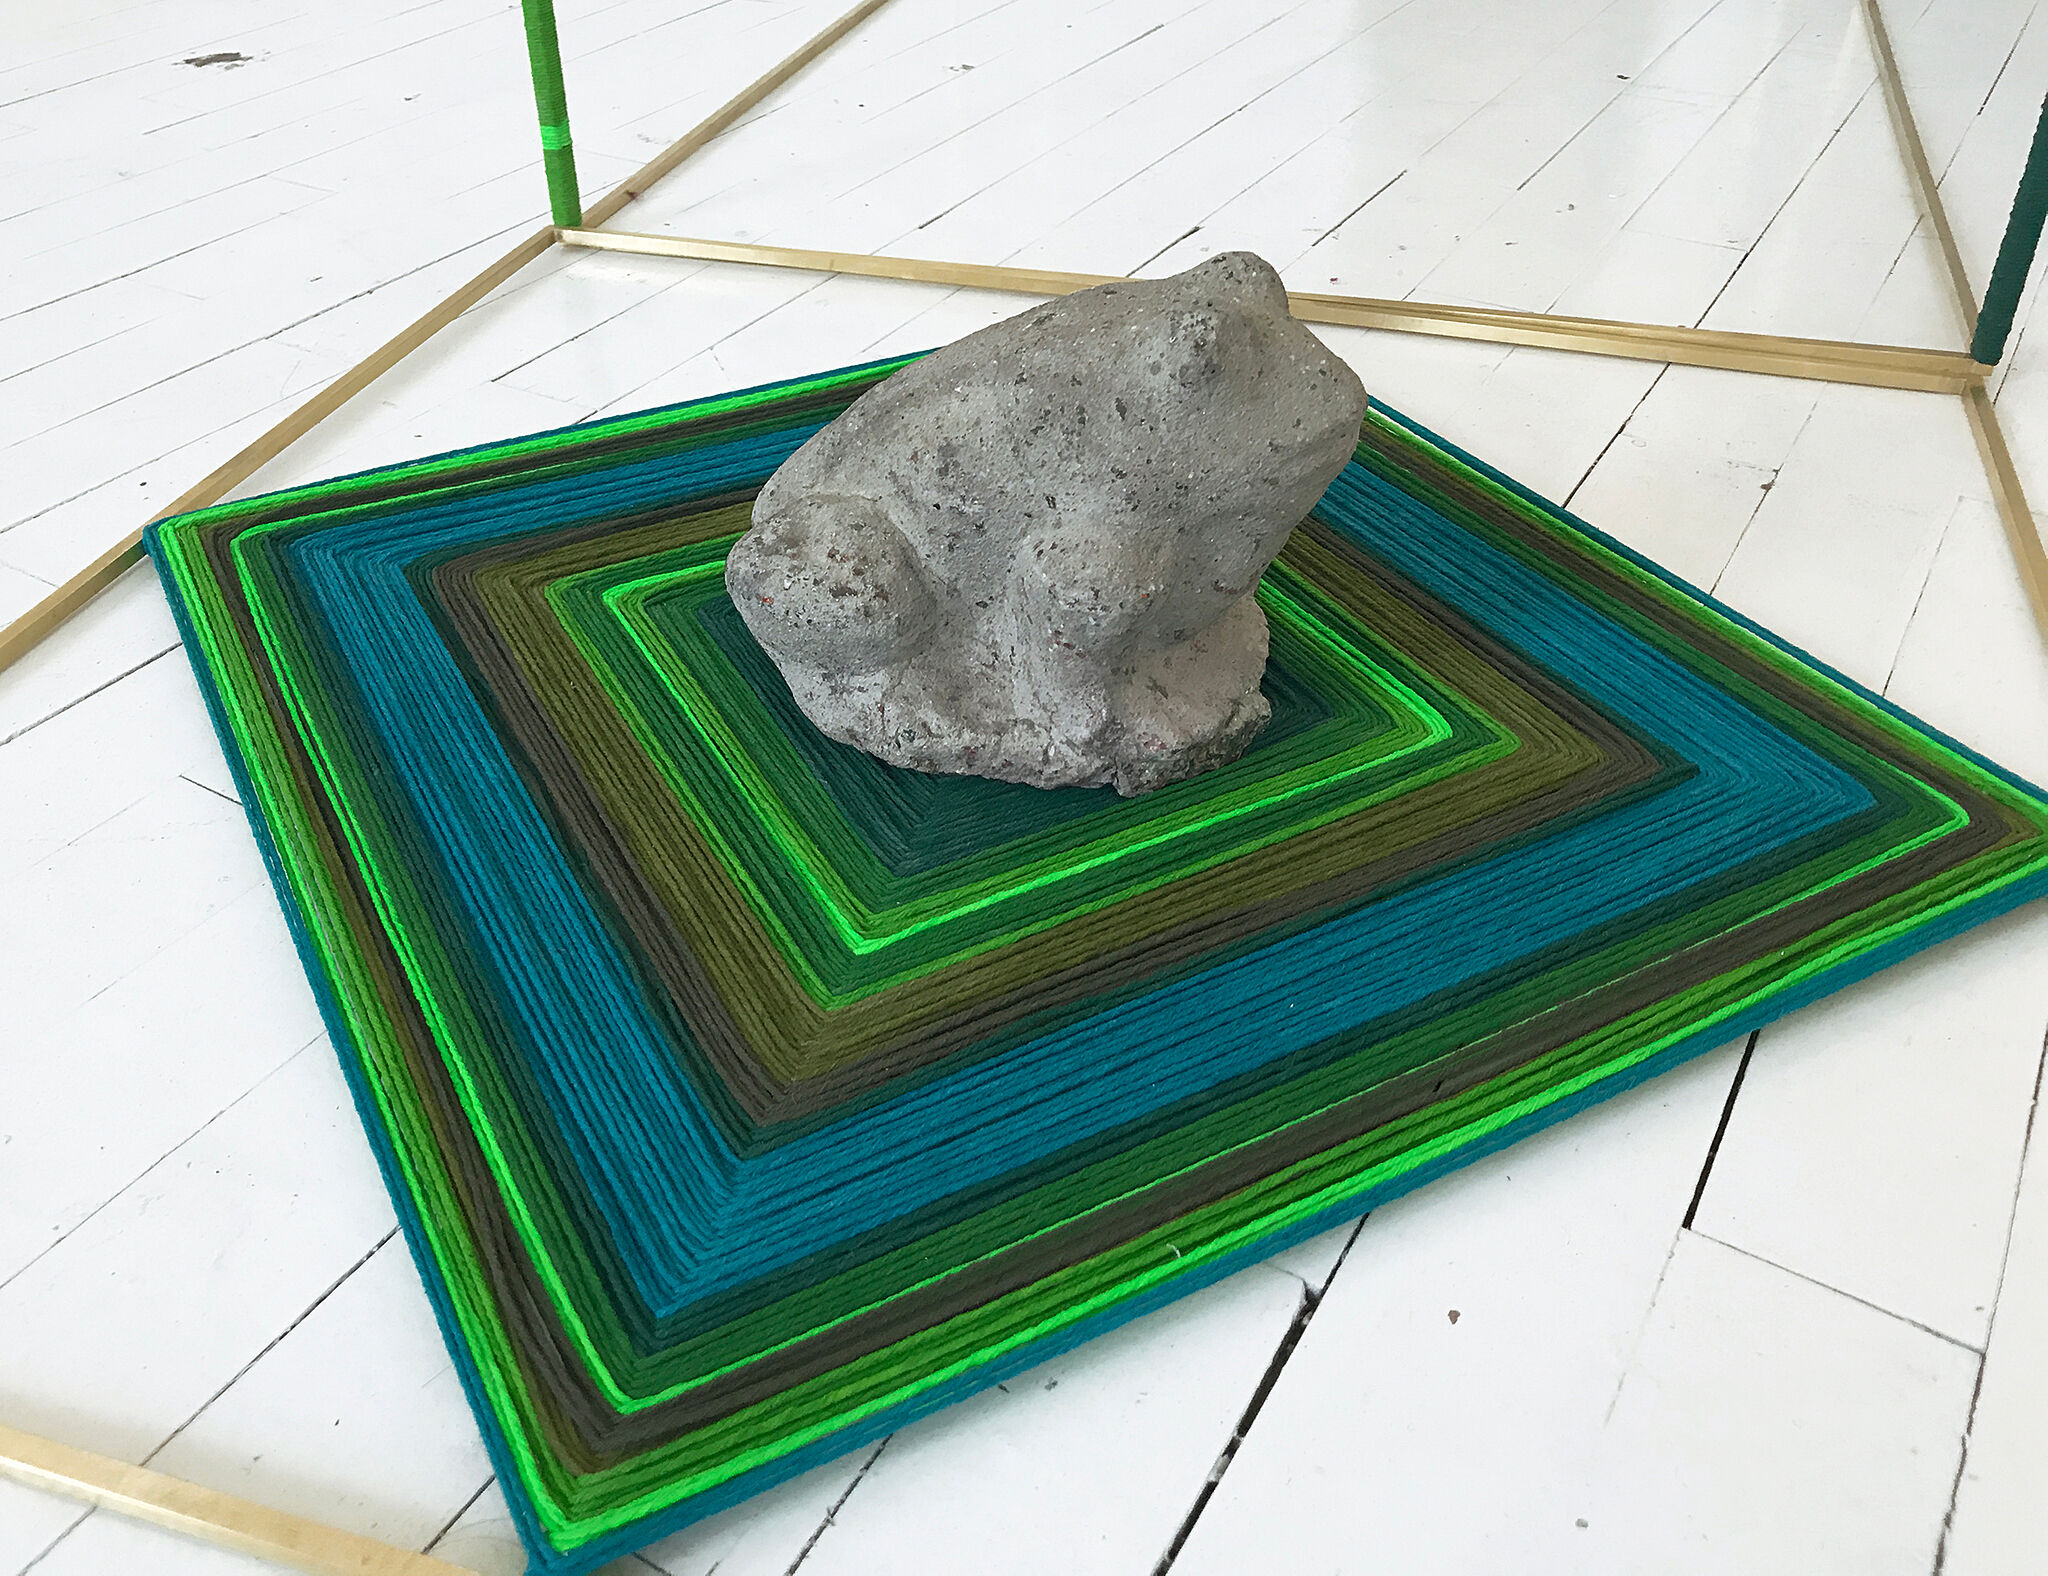 a frog sculpture sitting on a colorful square